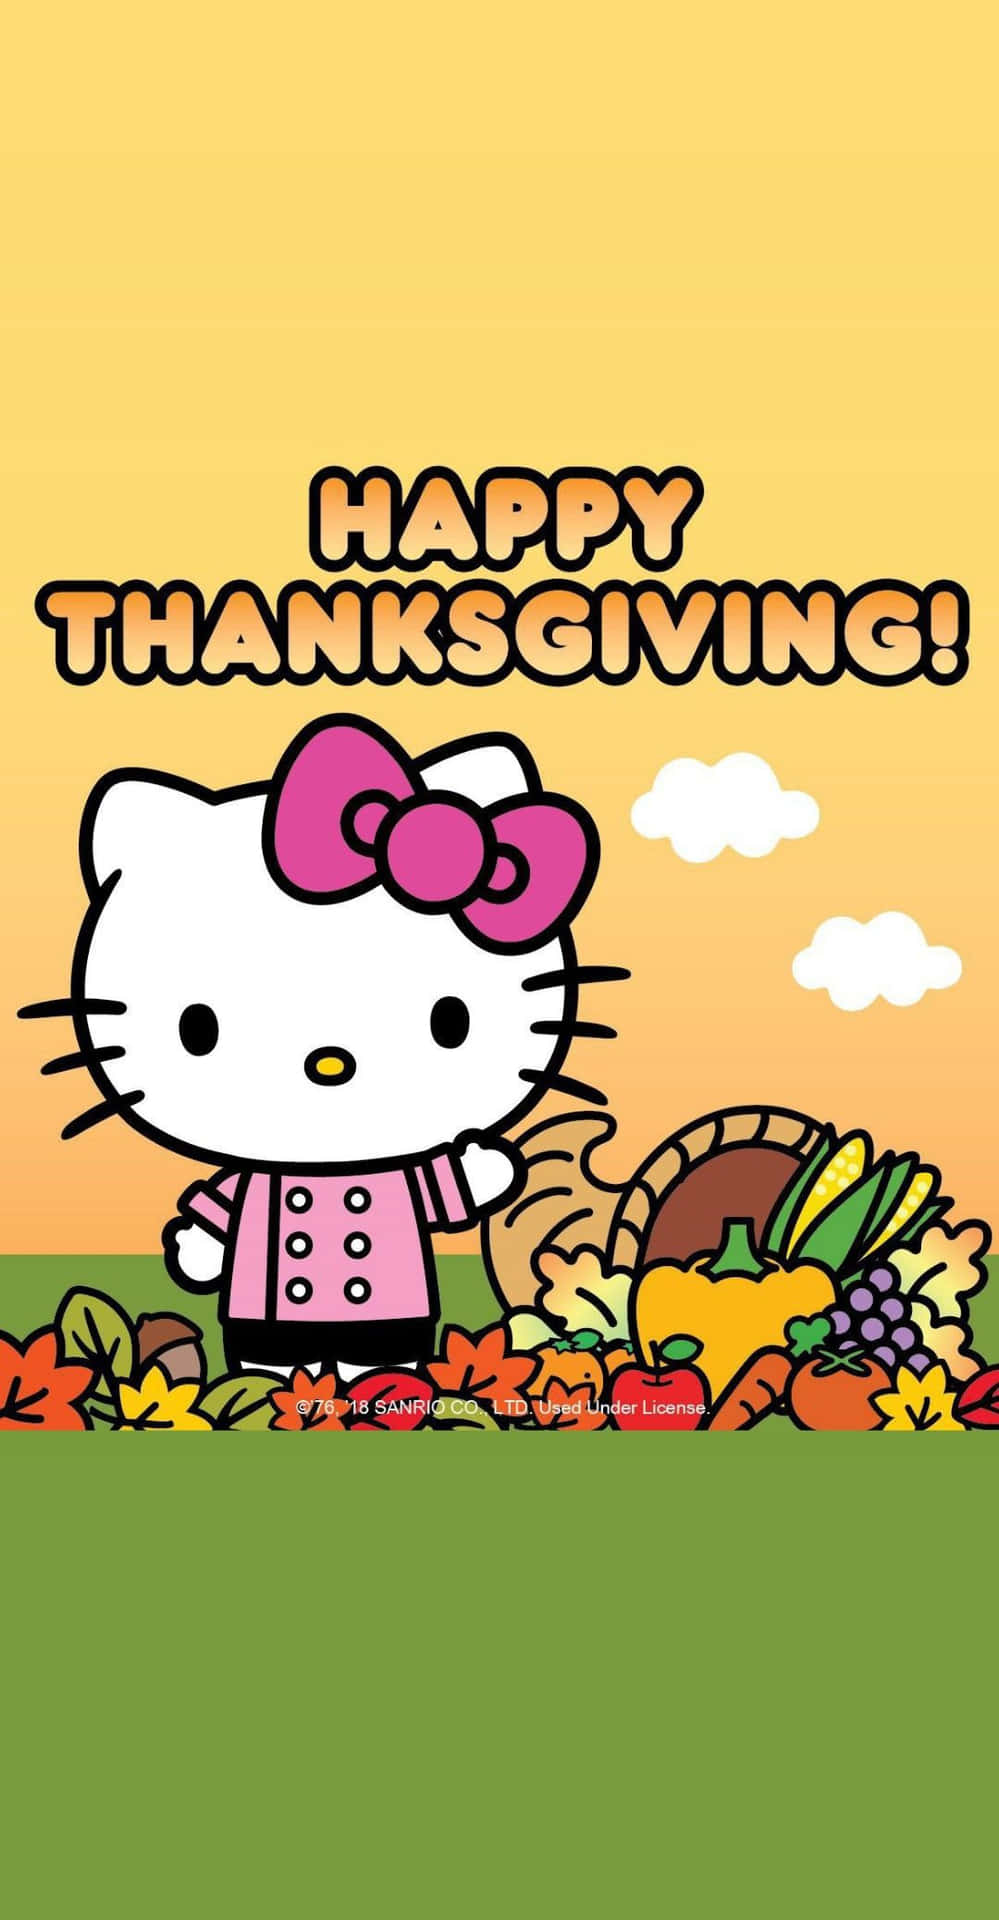 Get Festive This Thanksgiving With Hello Kitty! Background